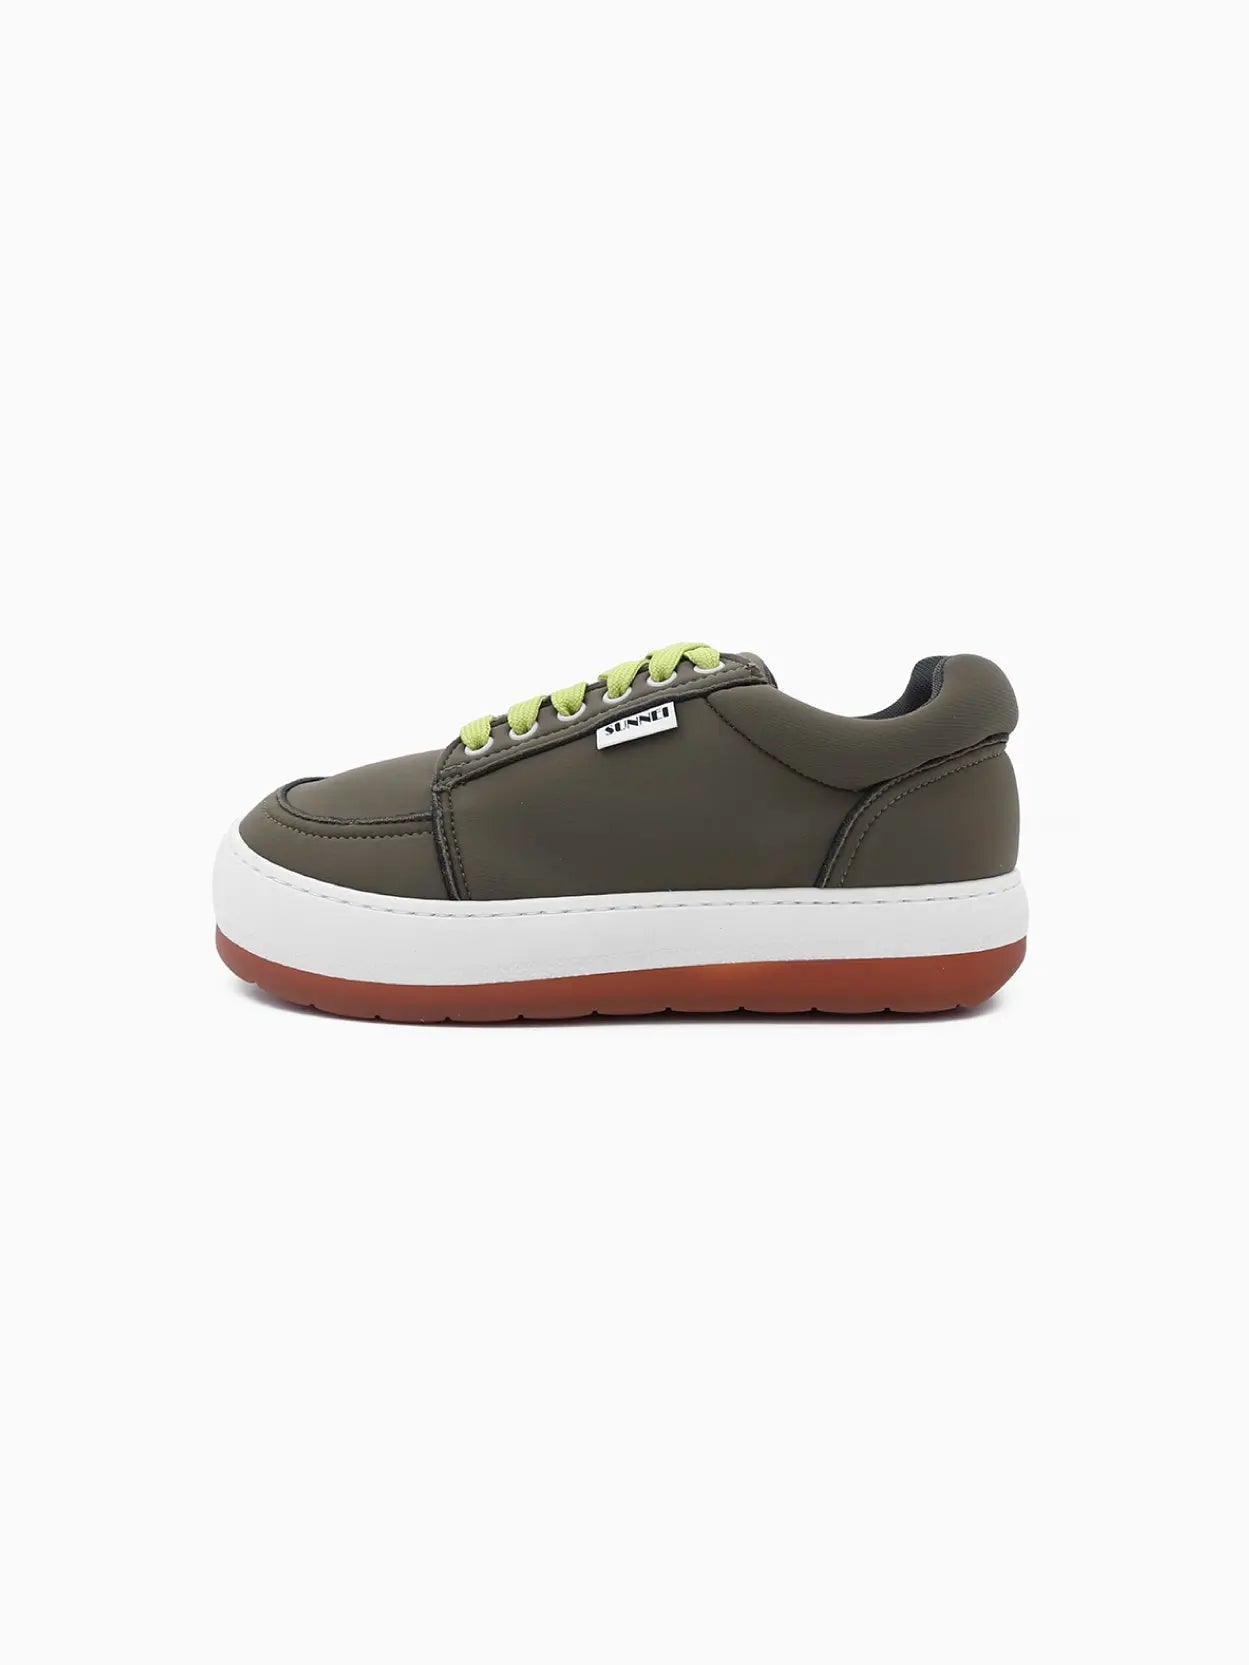 A single olive green sneaker with lime green laces, a thick white midsole, and a brown outsole. The shoe has a small black and white label on the outer side. It is displayed against a plain white background, available exclusively at Bassalstore in Barcelona. This is the Dreamy Shoes Green by Sunnei.